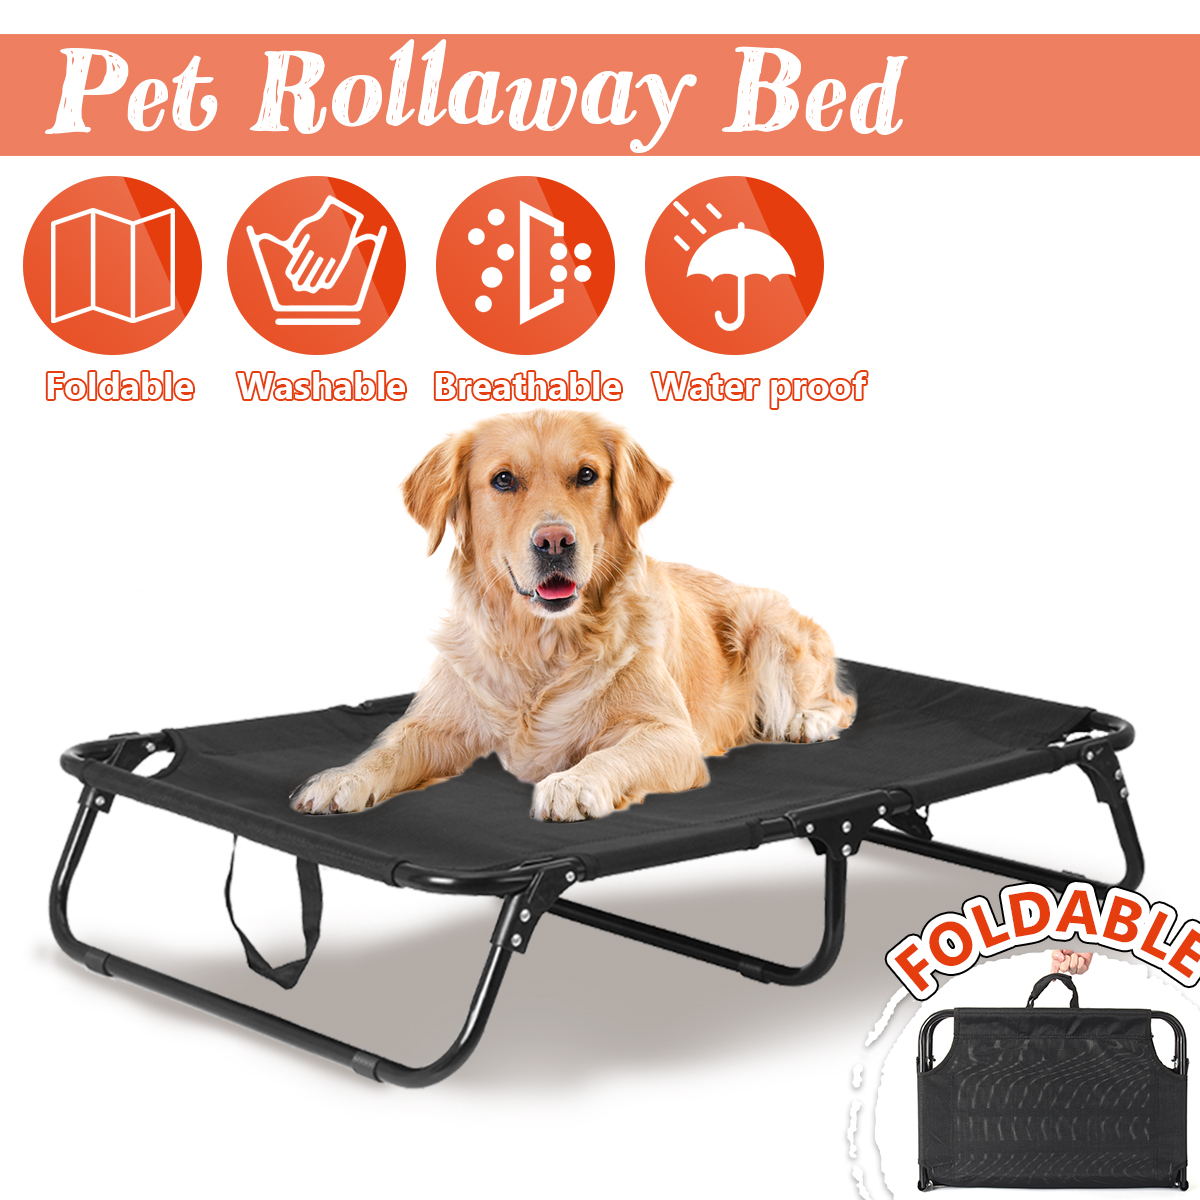 Elevated-Pet-Bed-Dog-Cat-Cooling-Lounger-Folding-Breathable-Mesh-Mat-Foldable-Removable-1958678-1